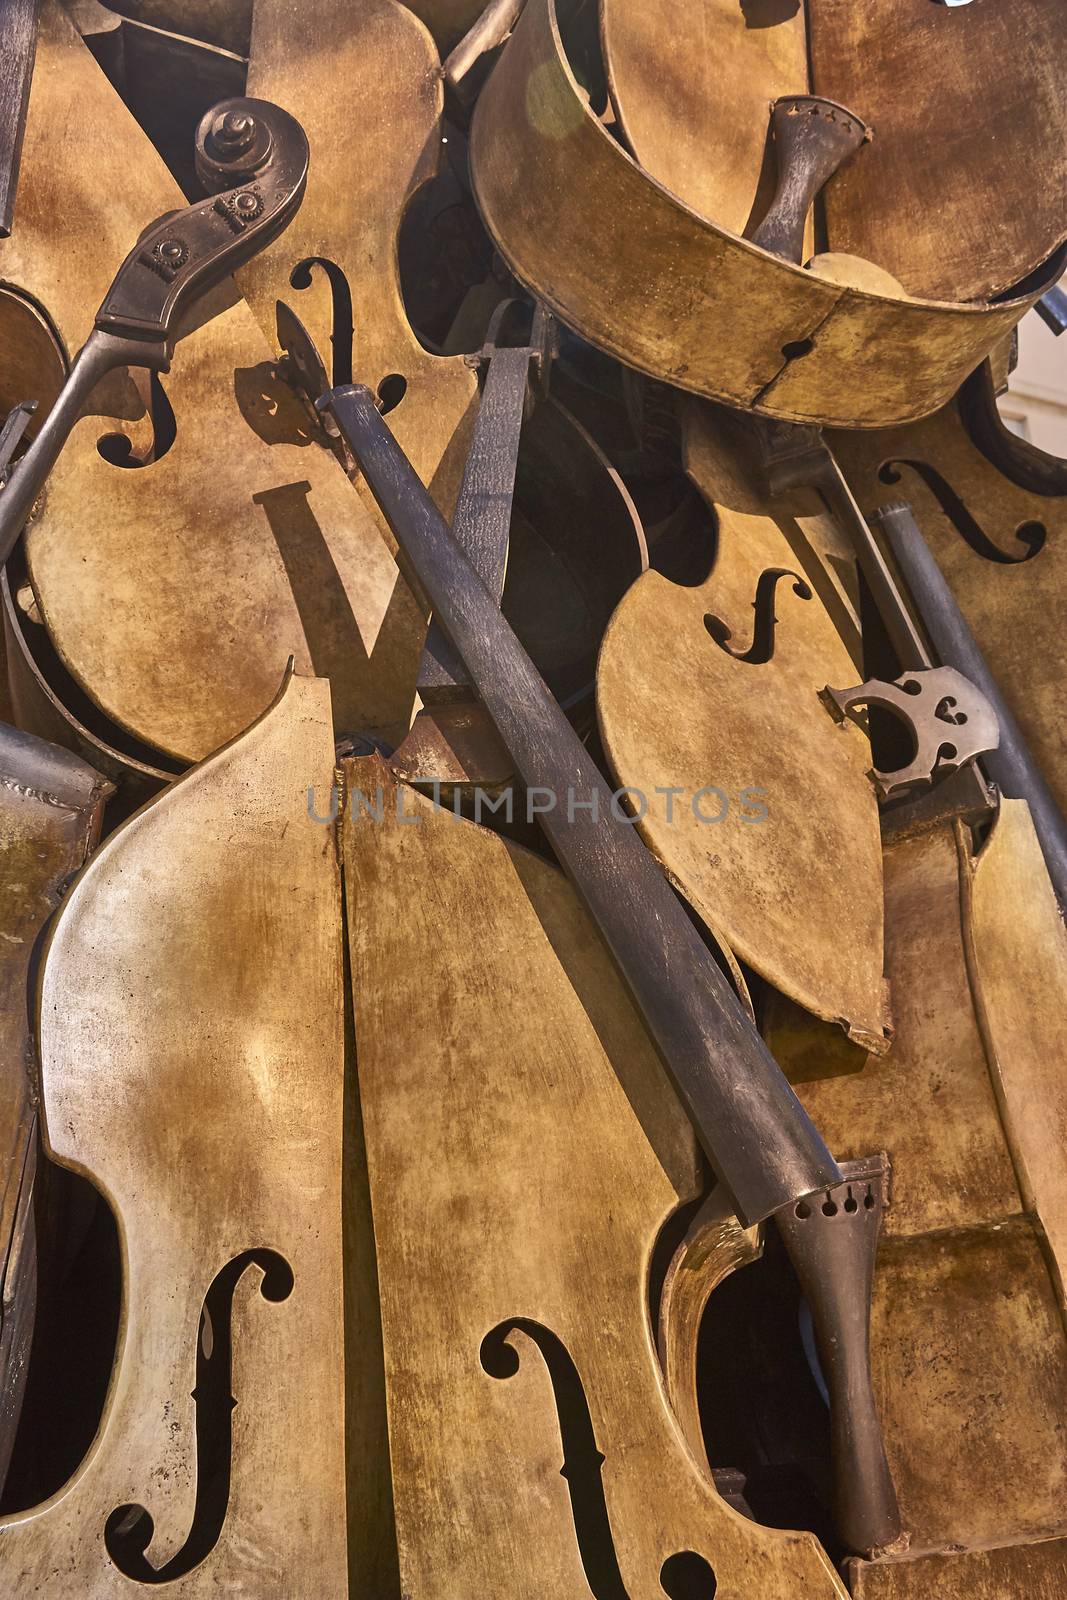 Pieces of violins by pippocarlot